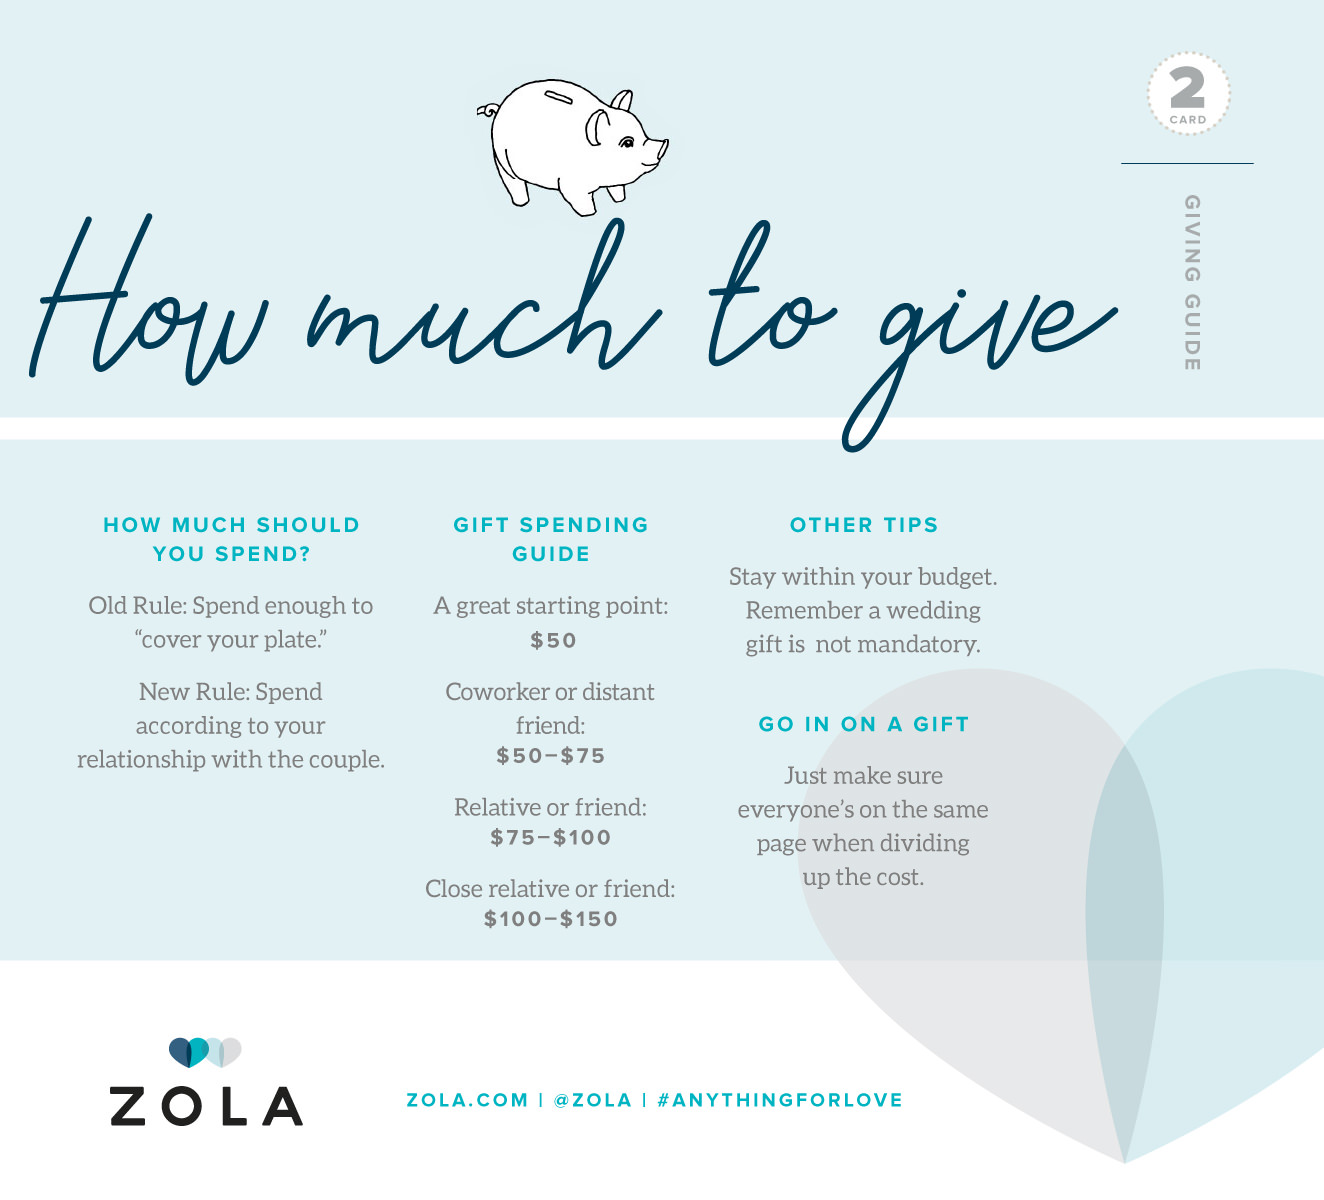 https://www.protocolww.com/wp-content/uploads/2017/08/Zola-Card-2-How-Much-To-Give.jpg